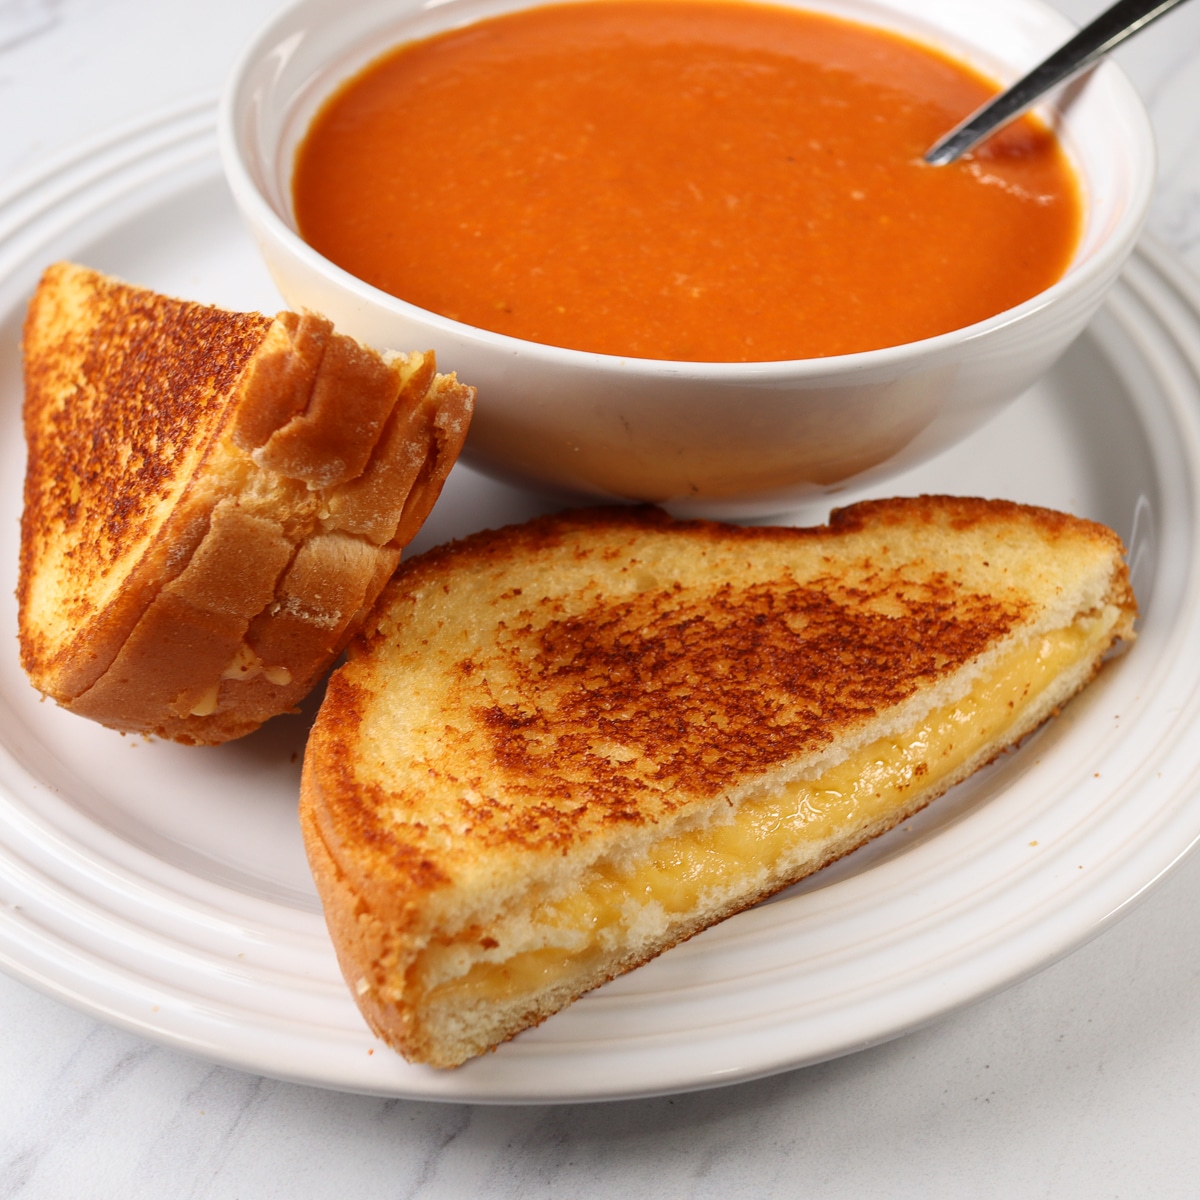 grilled cheese and tomato soup on a plate